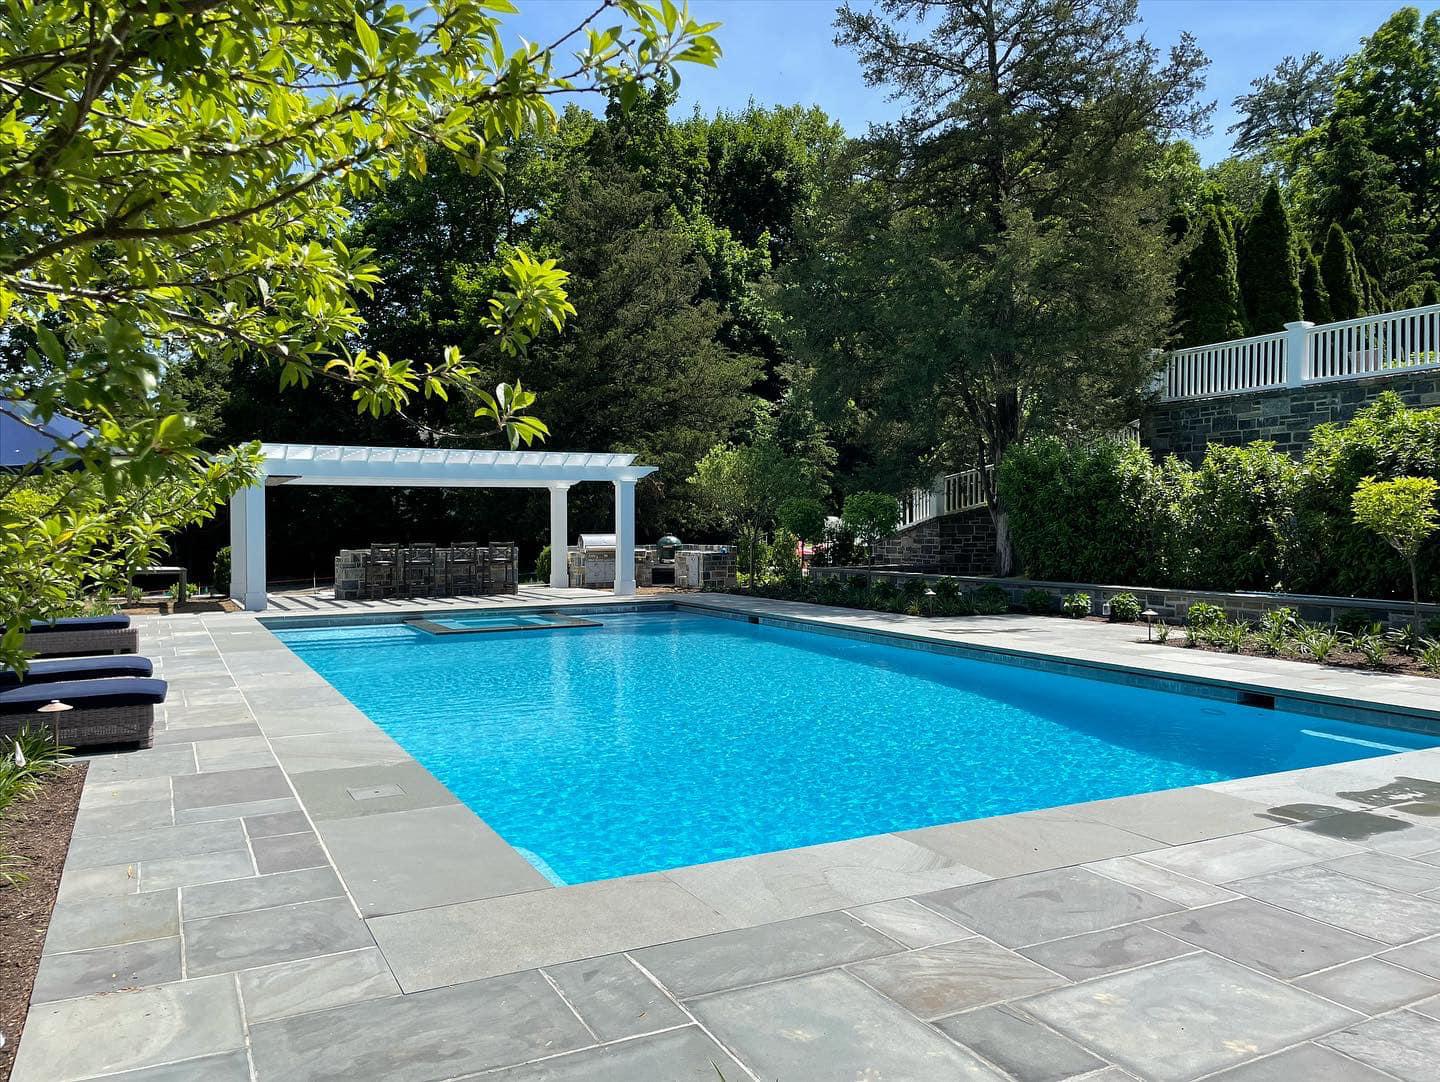 Call now for a pool installation service! Wagner Pools Darien (203)655-0766